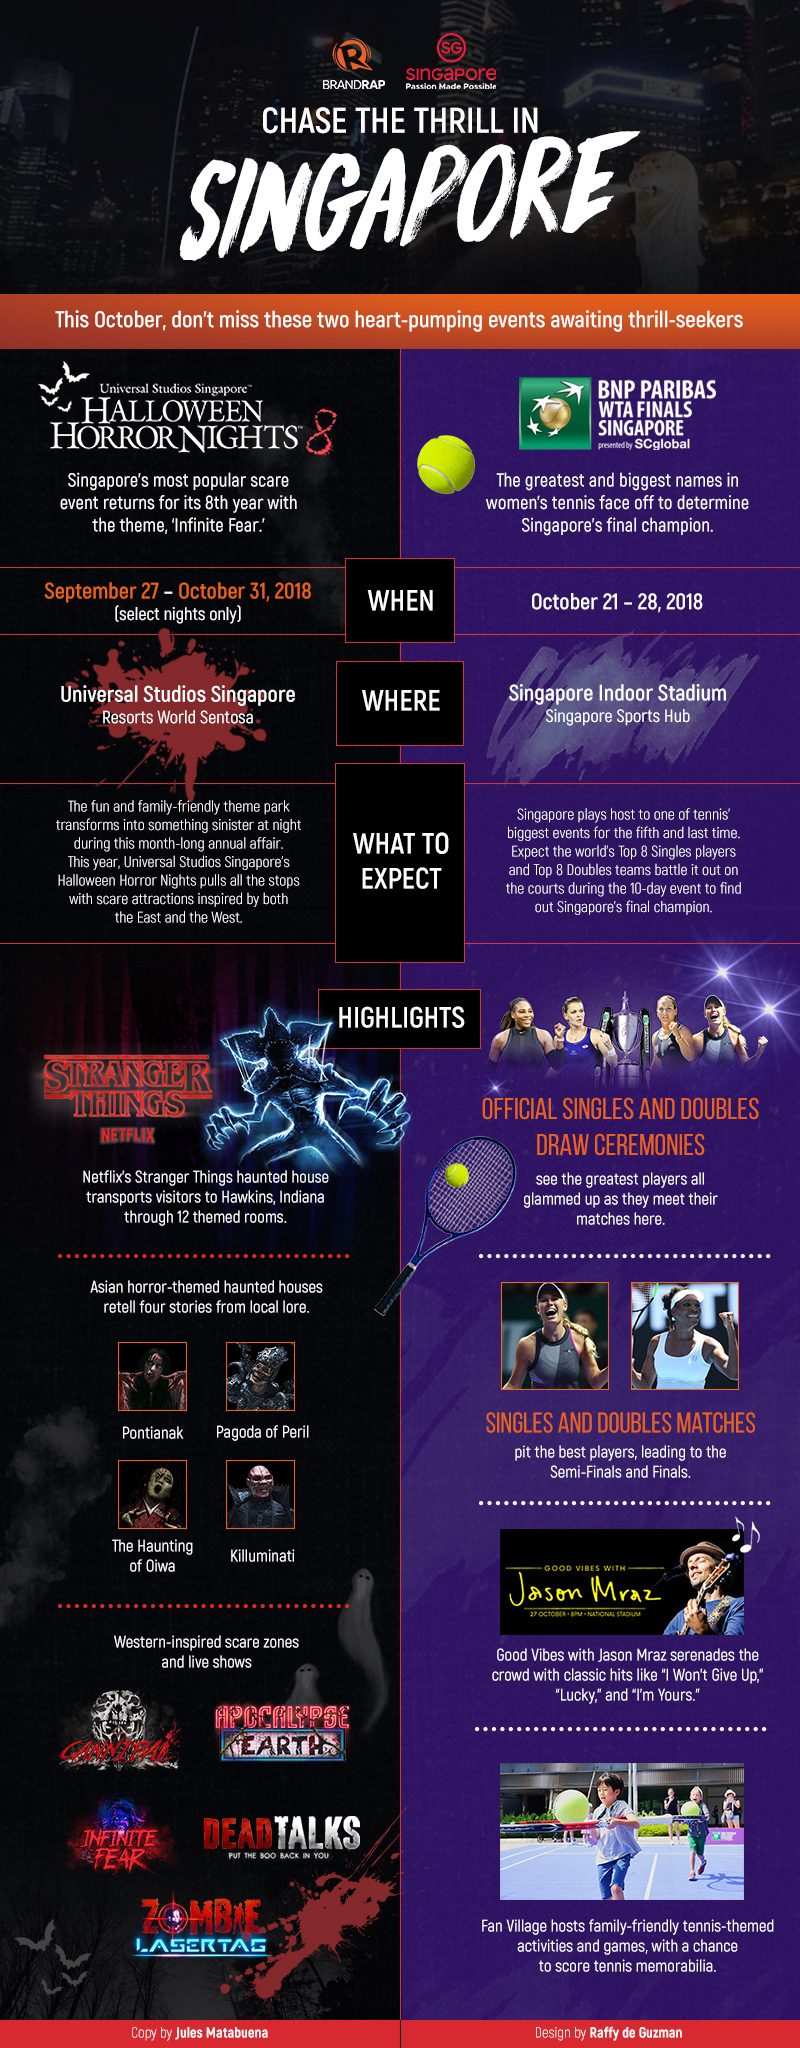 INFOGRAPHIC: Chase the thrill in Singapore this October 2018